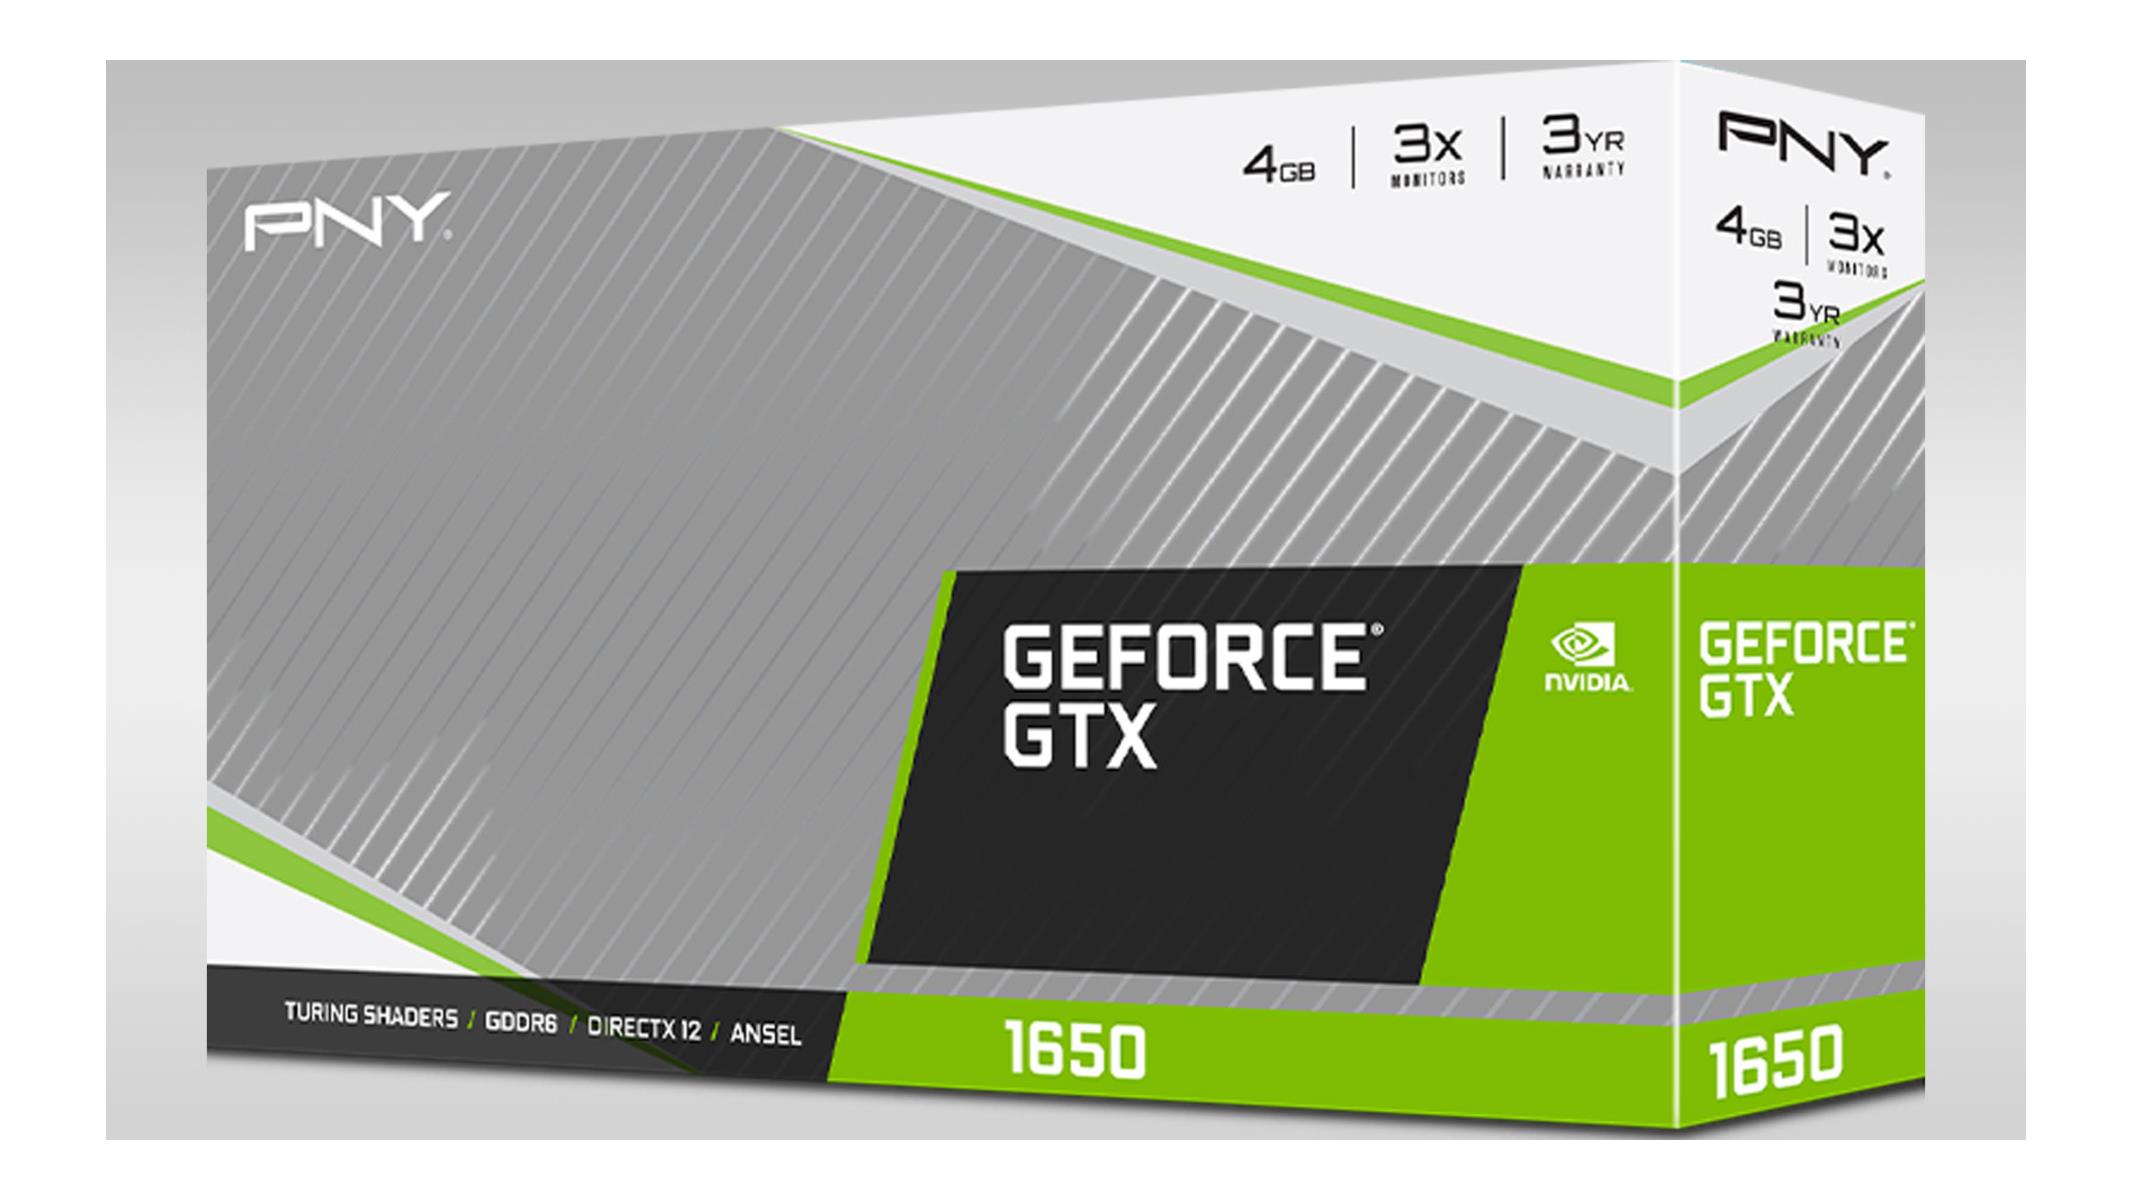 NVIDIA GeForce GTX 1650 is Still the Most Popular GPU in the Steam